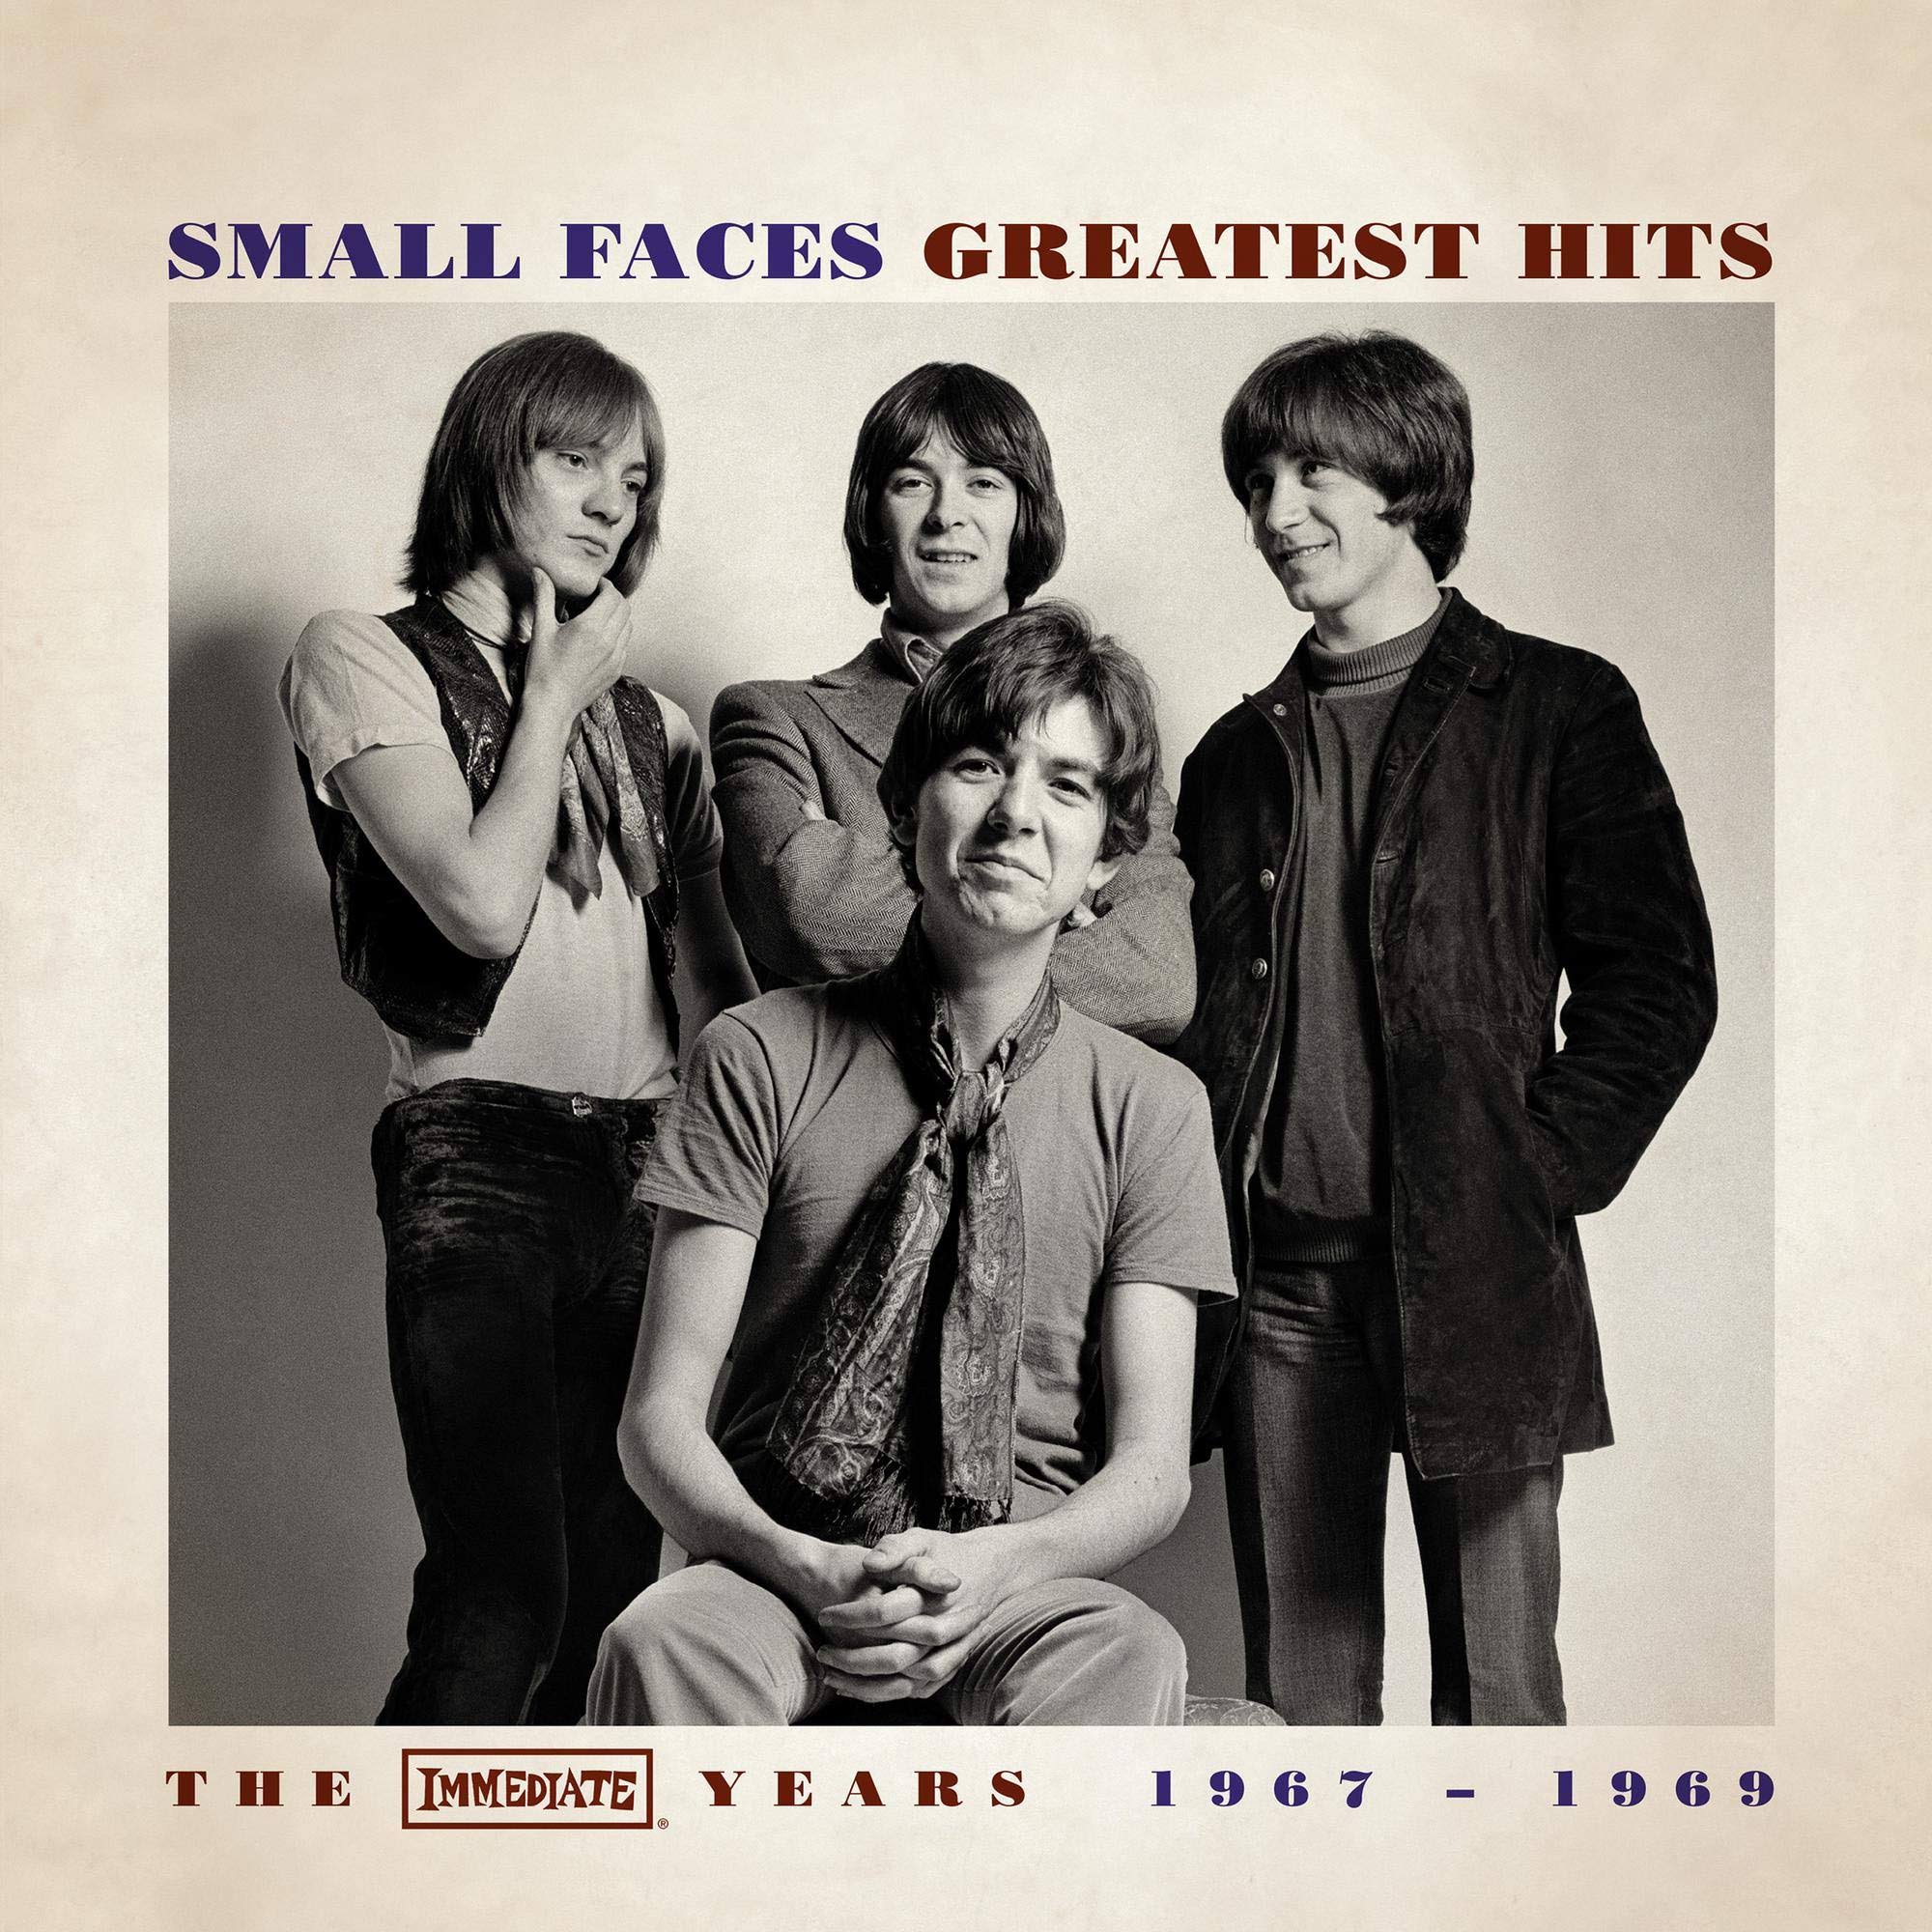 GREATEST HITS - THE IMMEDIATE YEARS 1967-1969 - SMALL FACES - vinyl